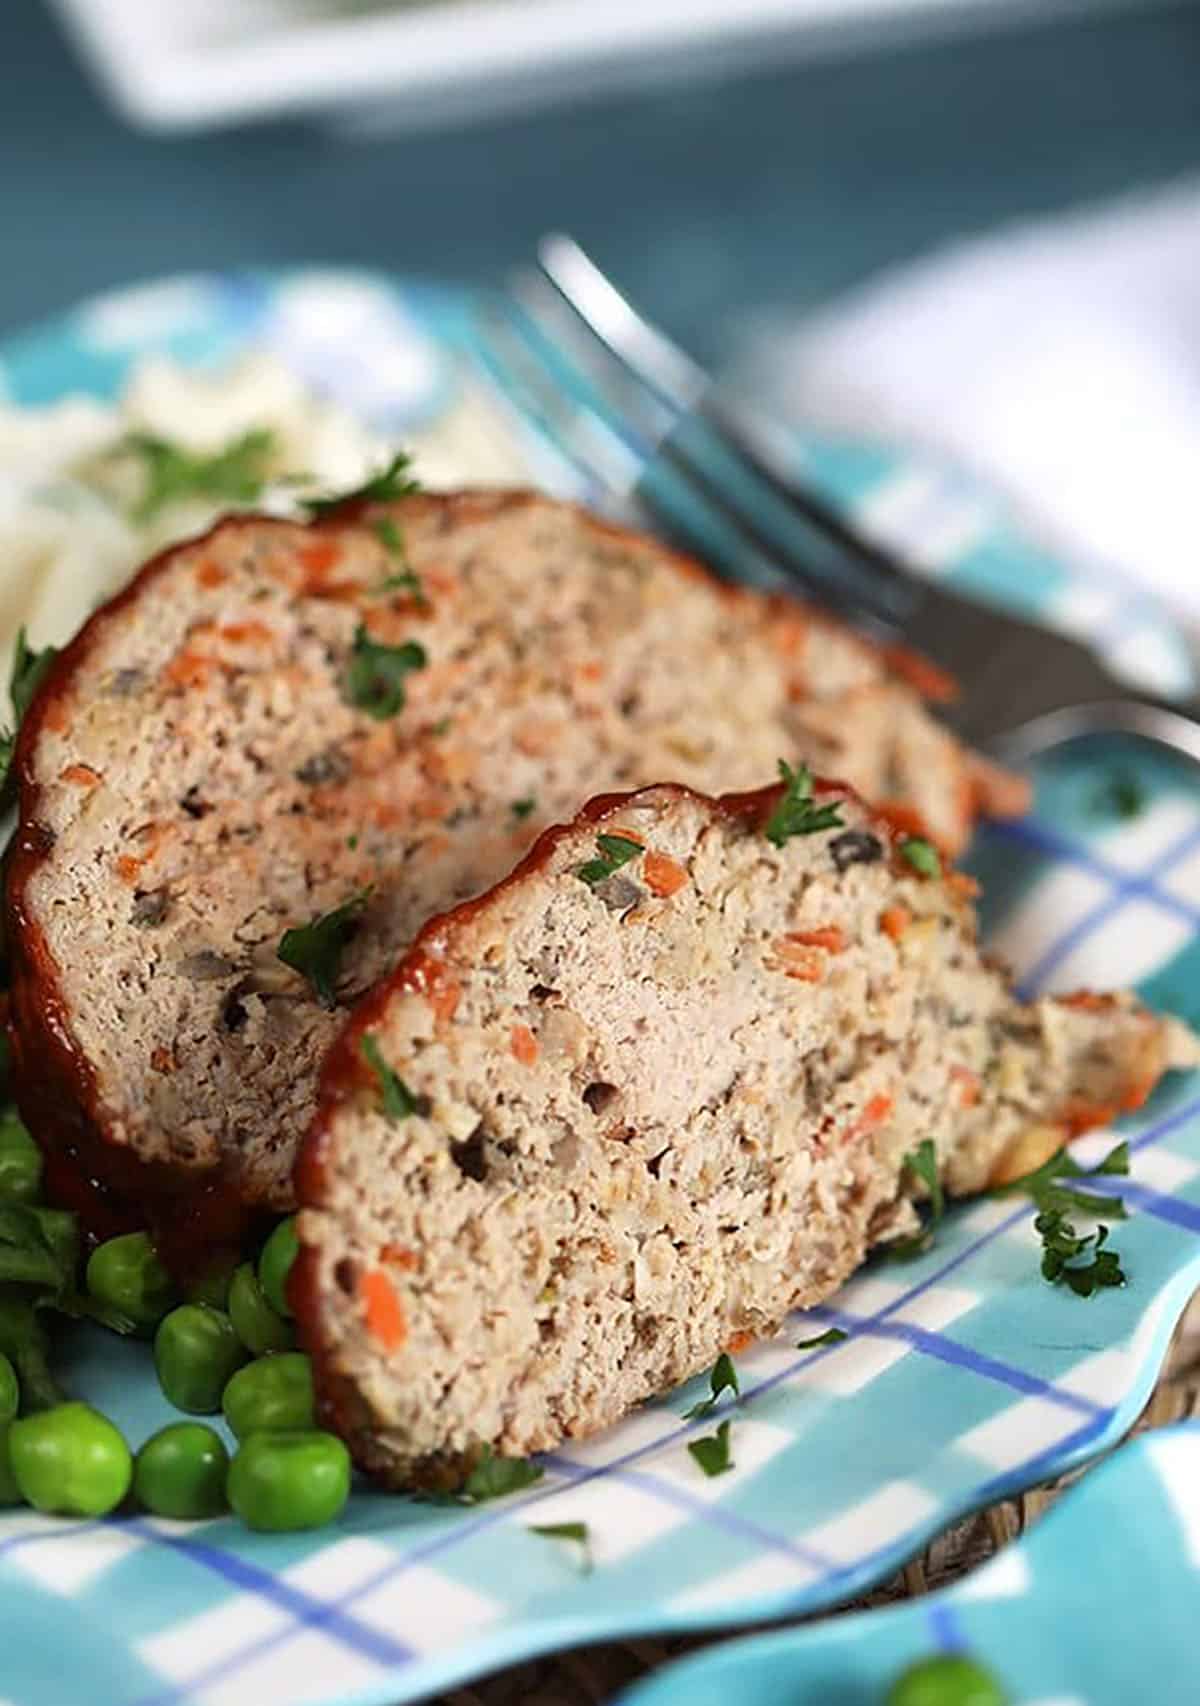 Two slices of Turkey Meatloaf on a plaid plate with mashed potatoes.